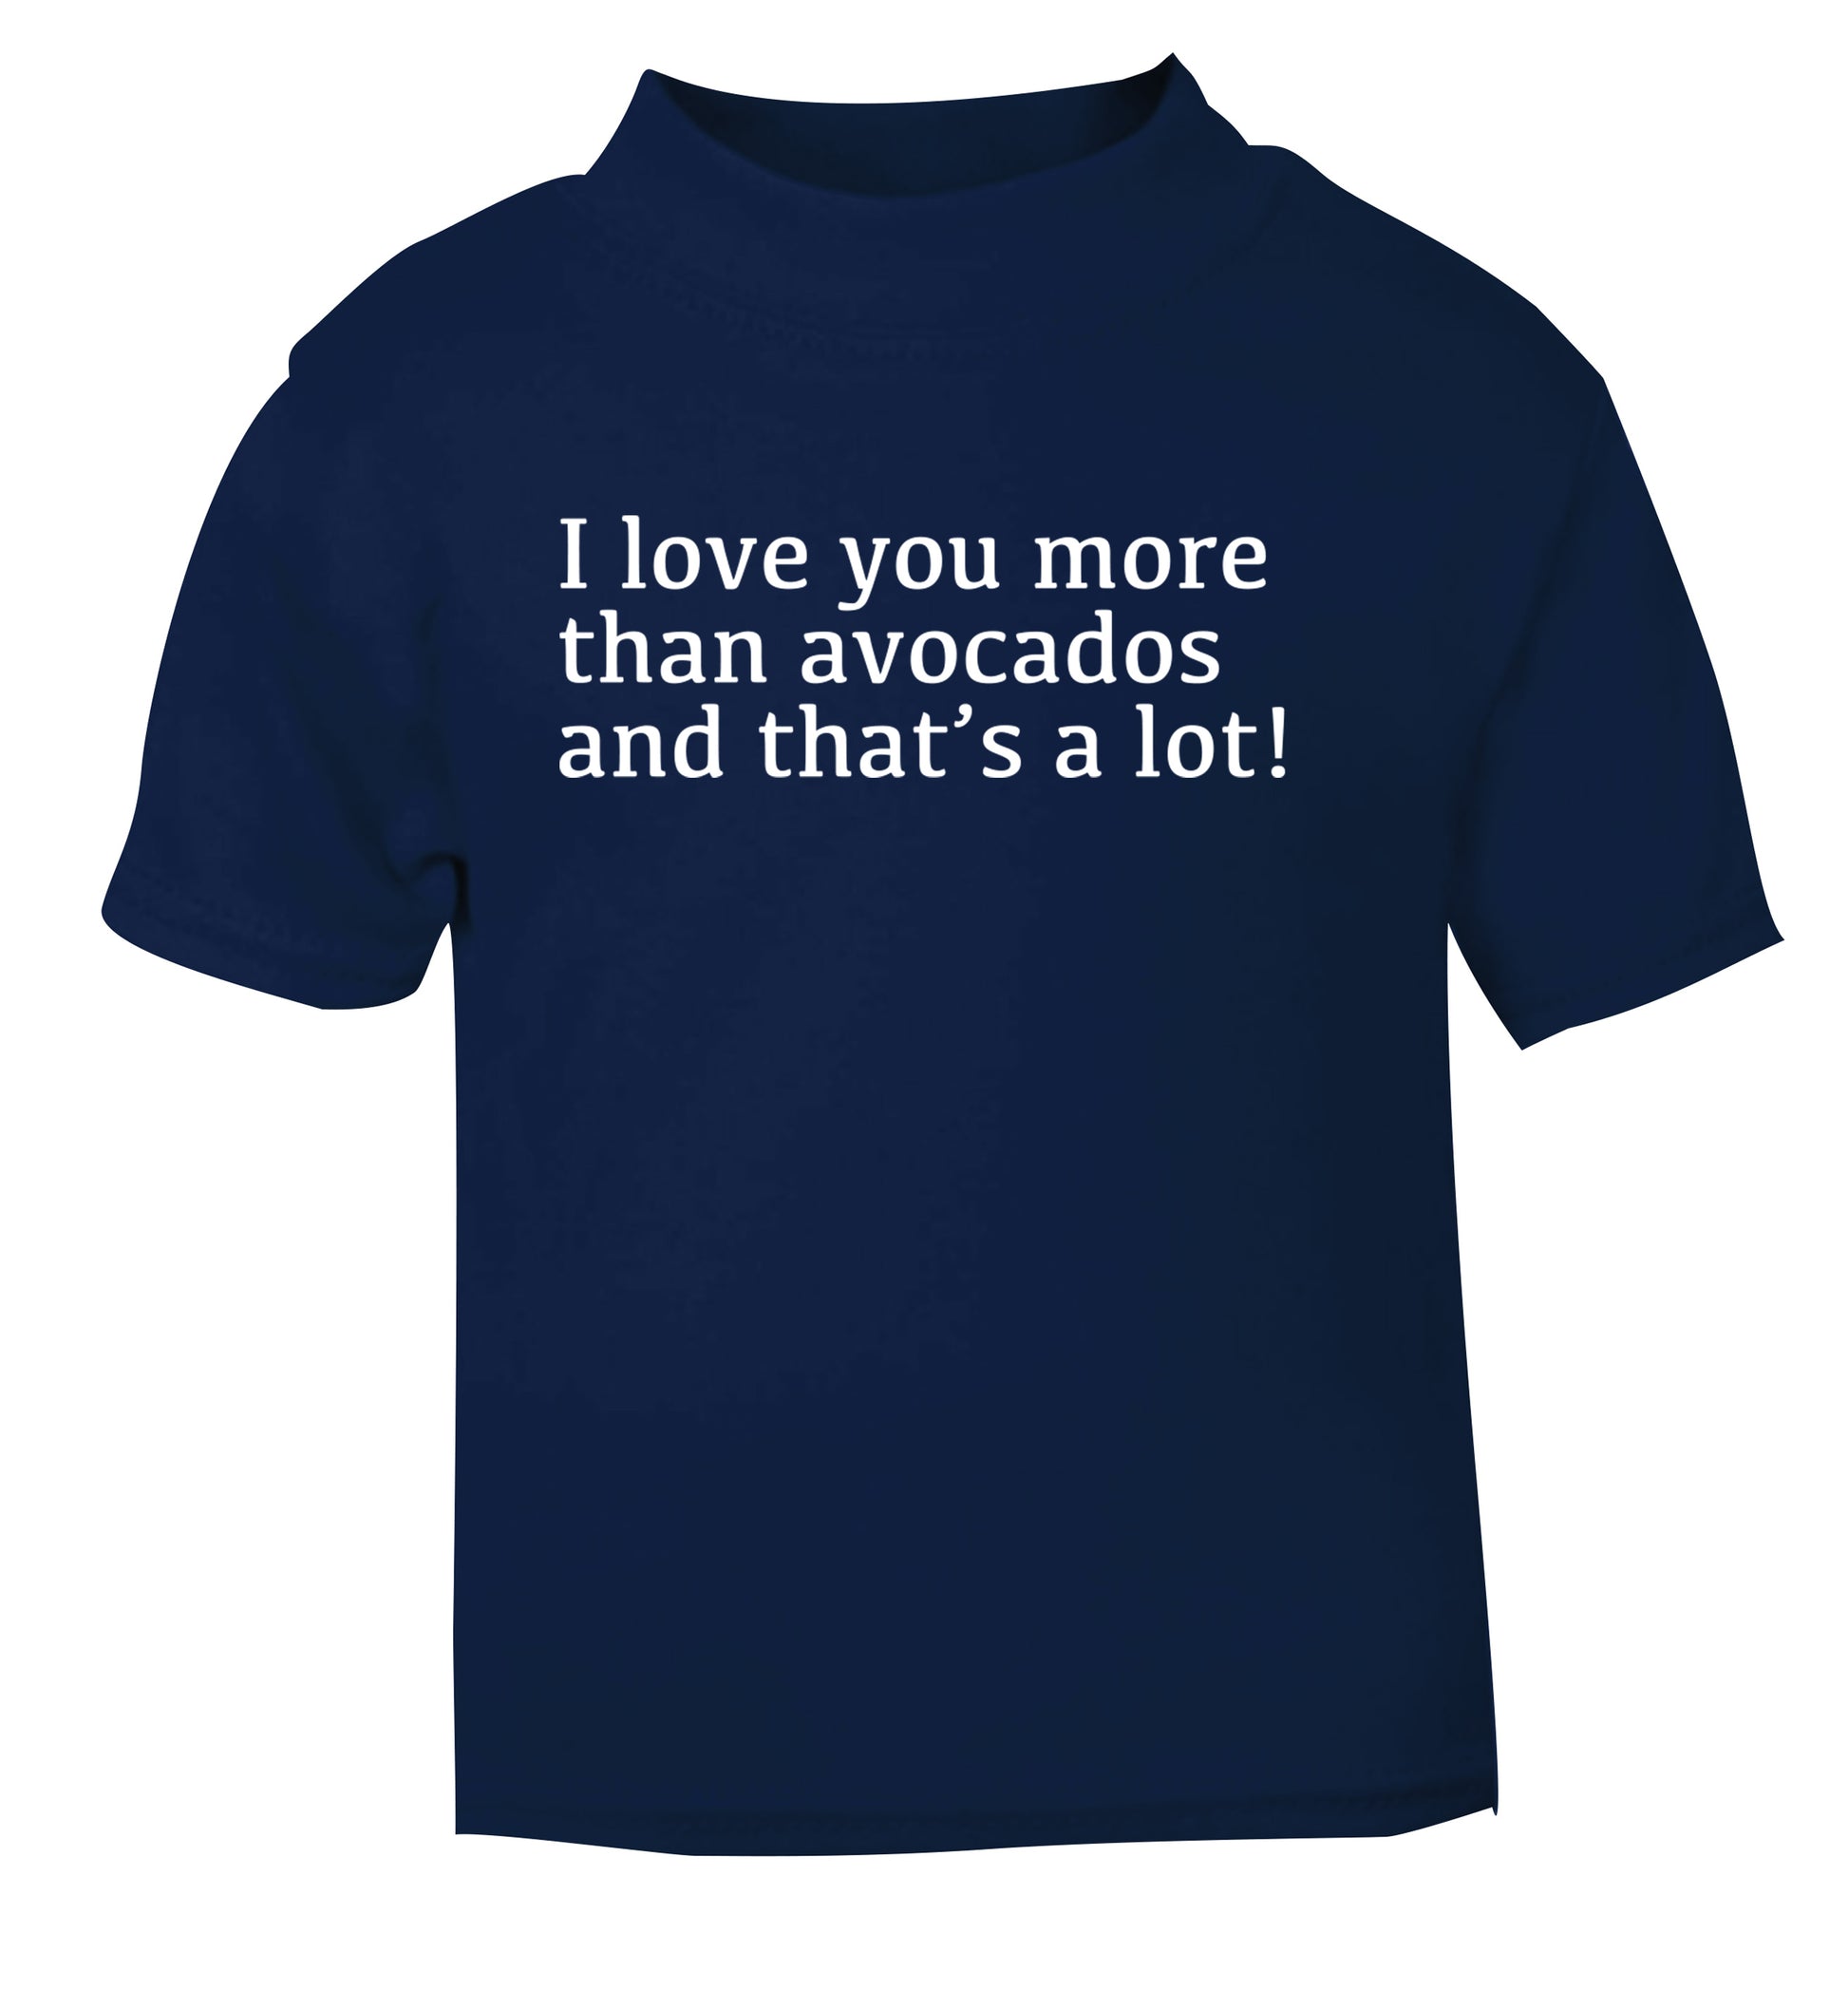 I love you more than avocados and that's a lot navy Baby Toddler Tshirt 2 Years